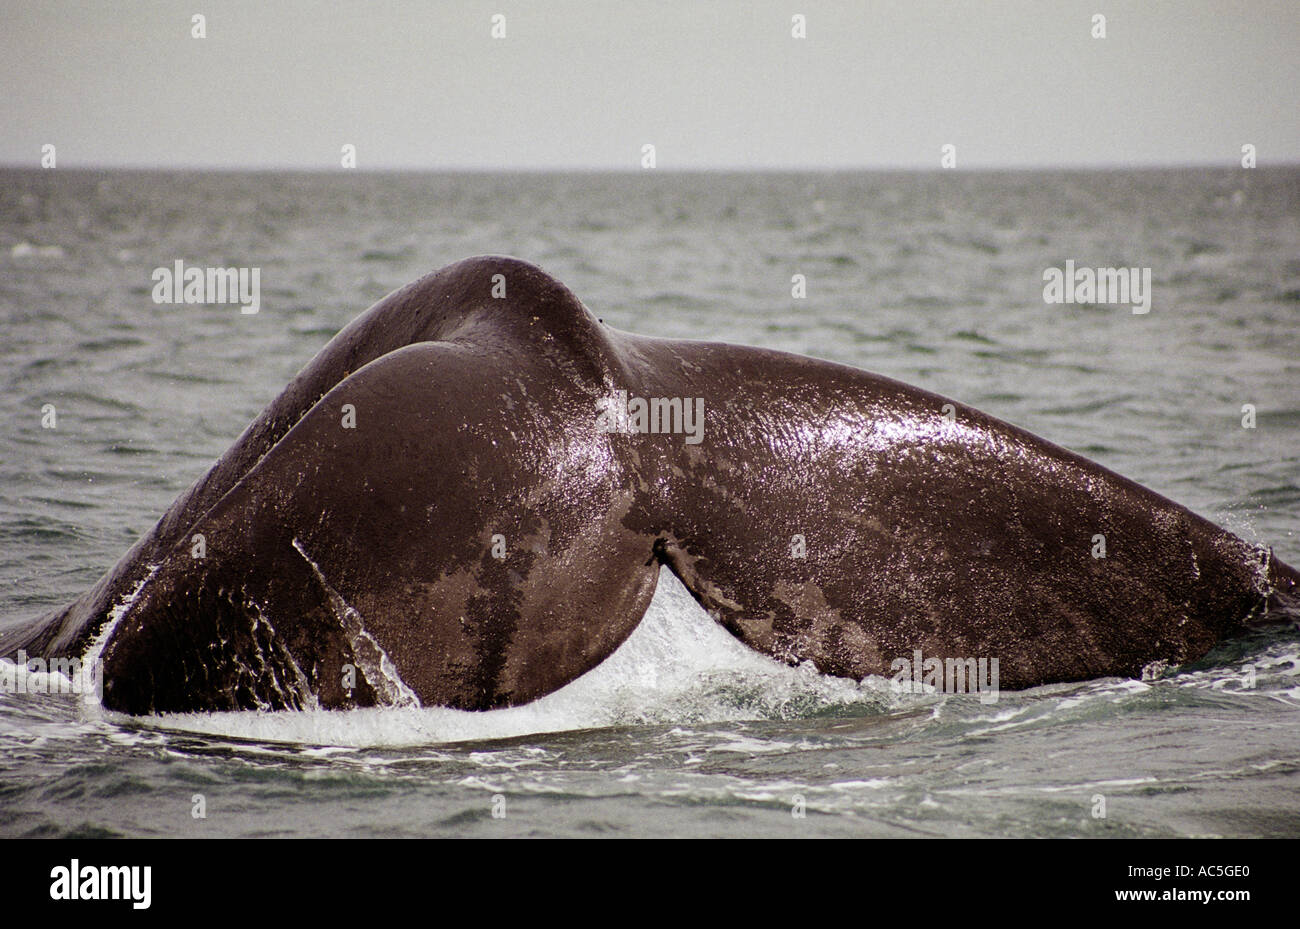 Patagonia Argentina November 2002 Tail of southern right whale in Gulfo Nuevo off Peninsula Valdes Chubut Stock Photo